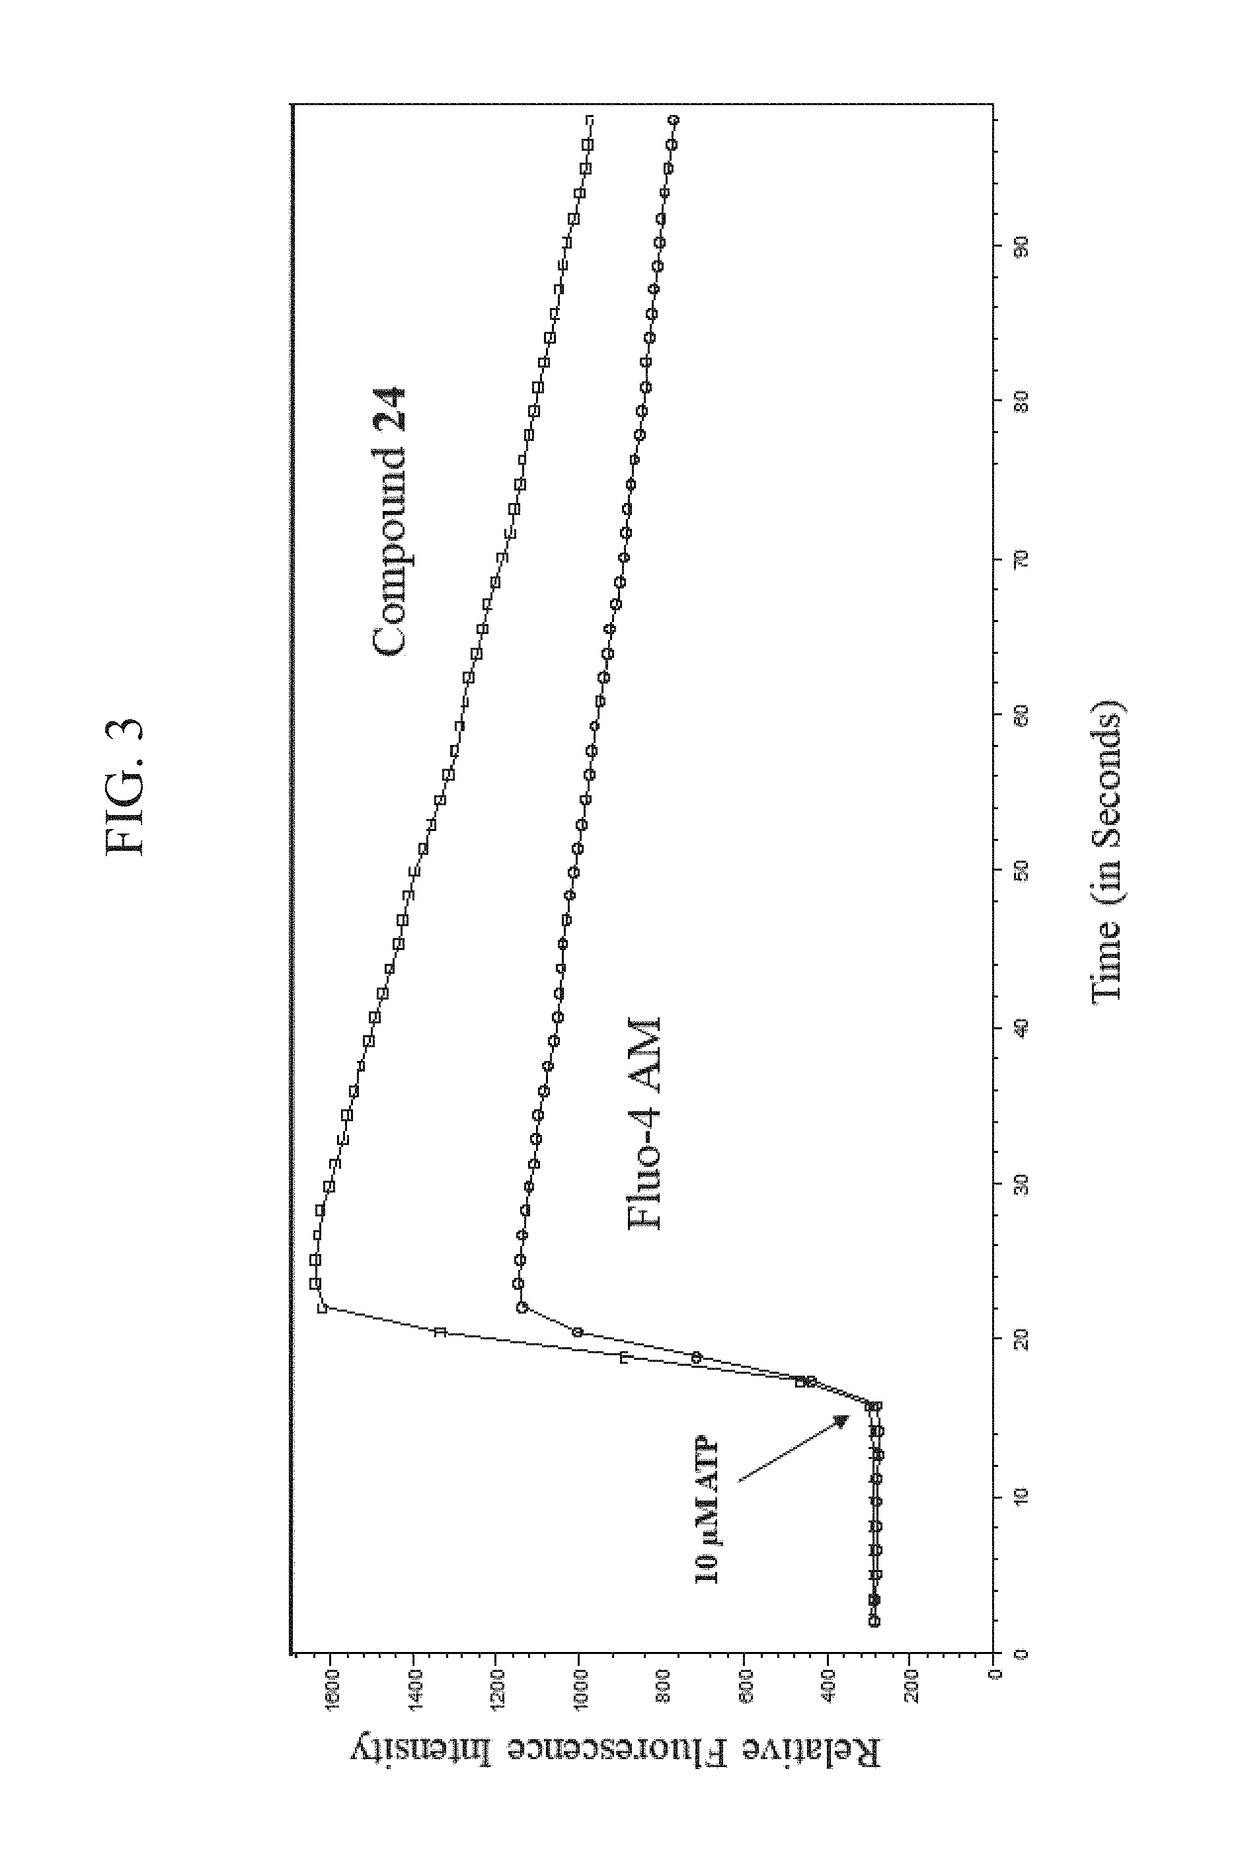 Fluorogenic calcium ion indicators and methods of using the same